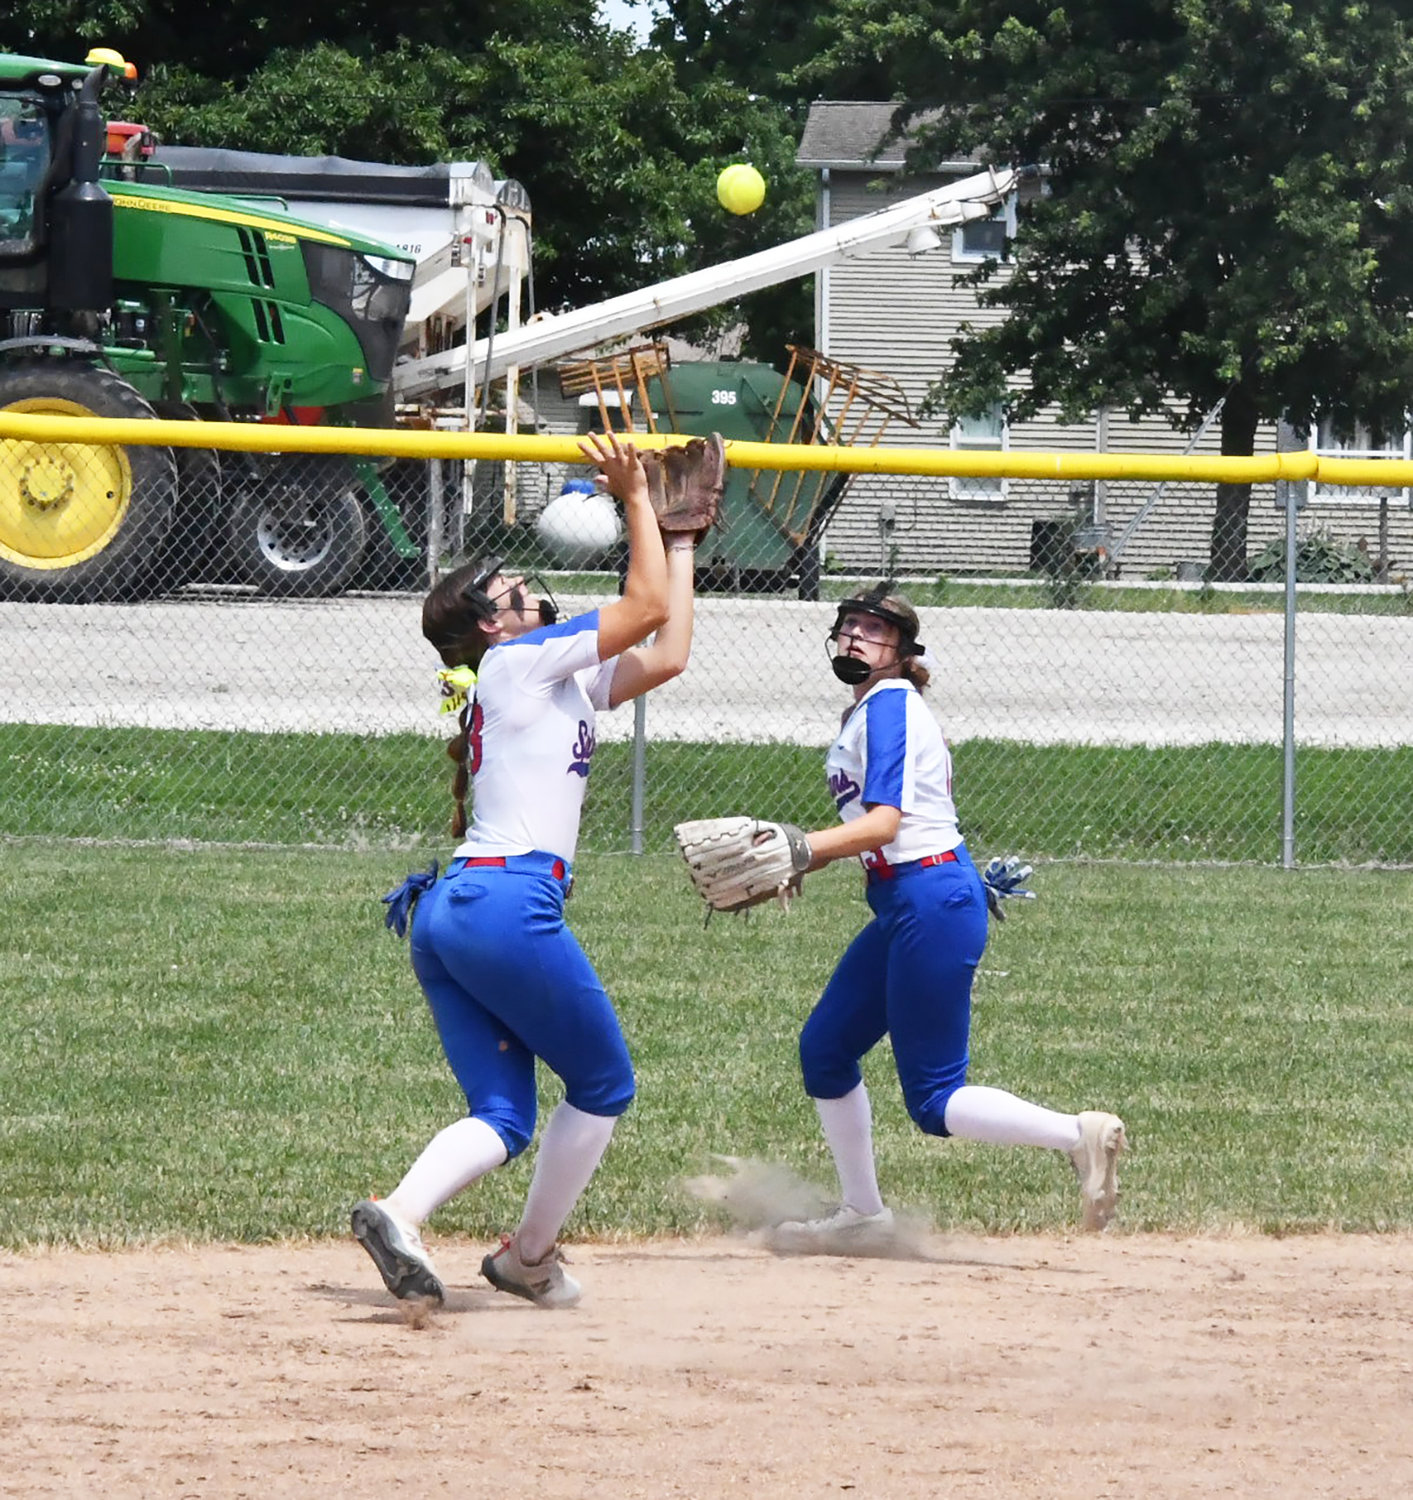 Moberly shortstop Kennedy Messer, left, records the putout while Elizabeth Reisenauer backs up the play.